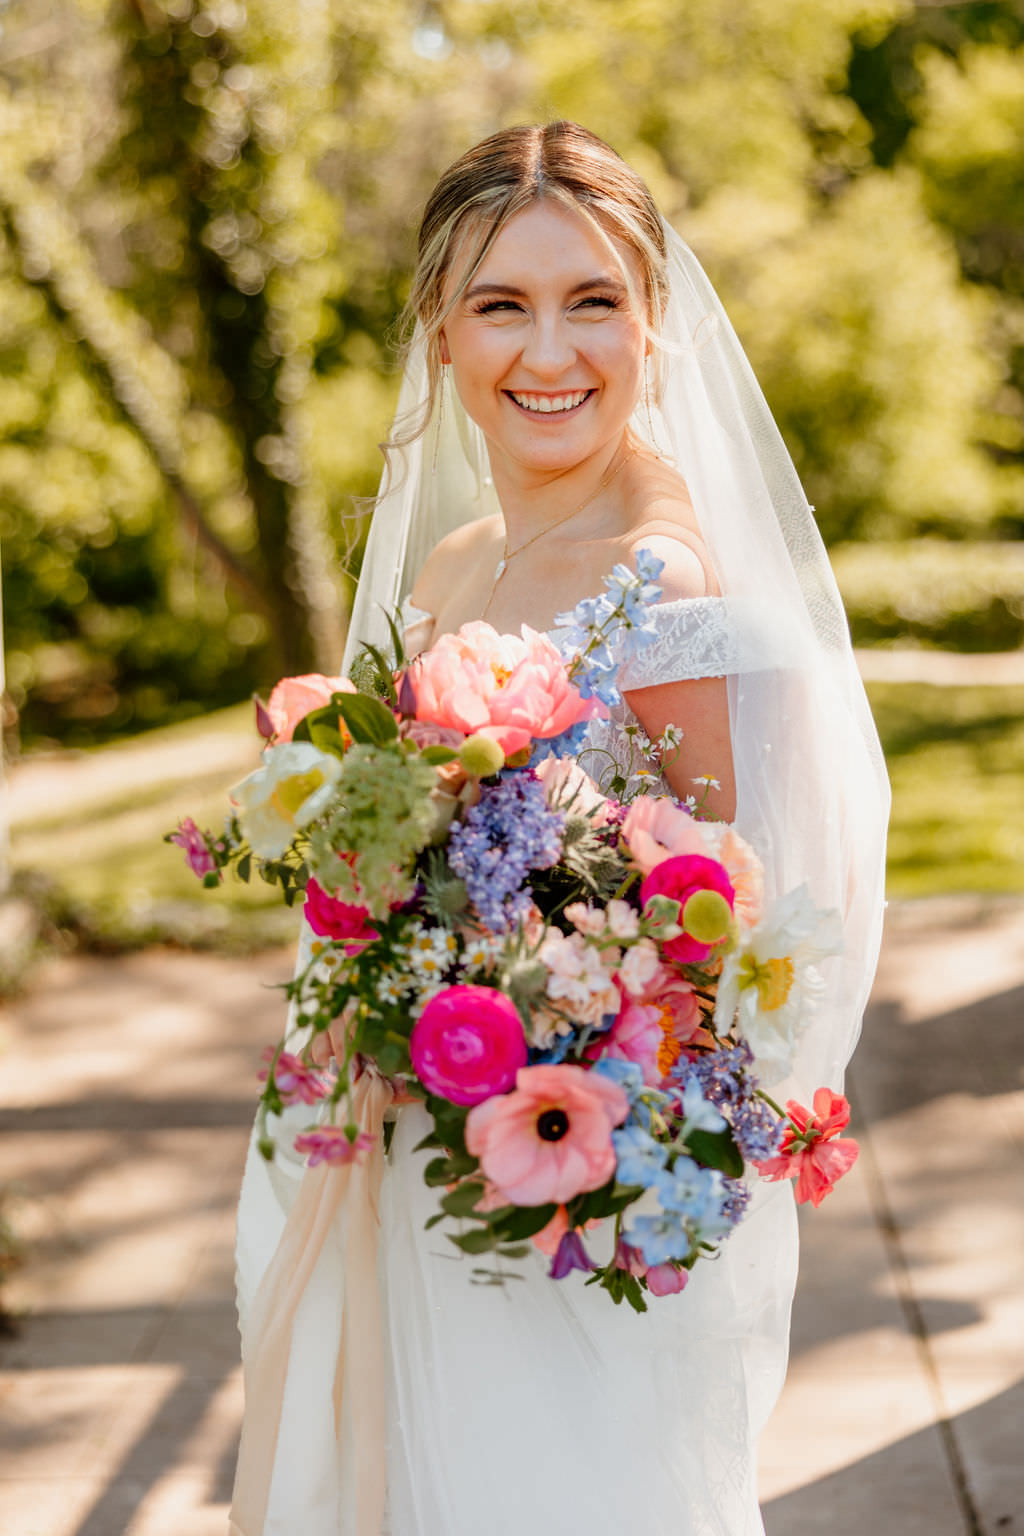 Bride smiling holding her bouquet at central PA wedding venue